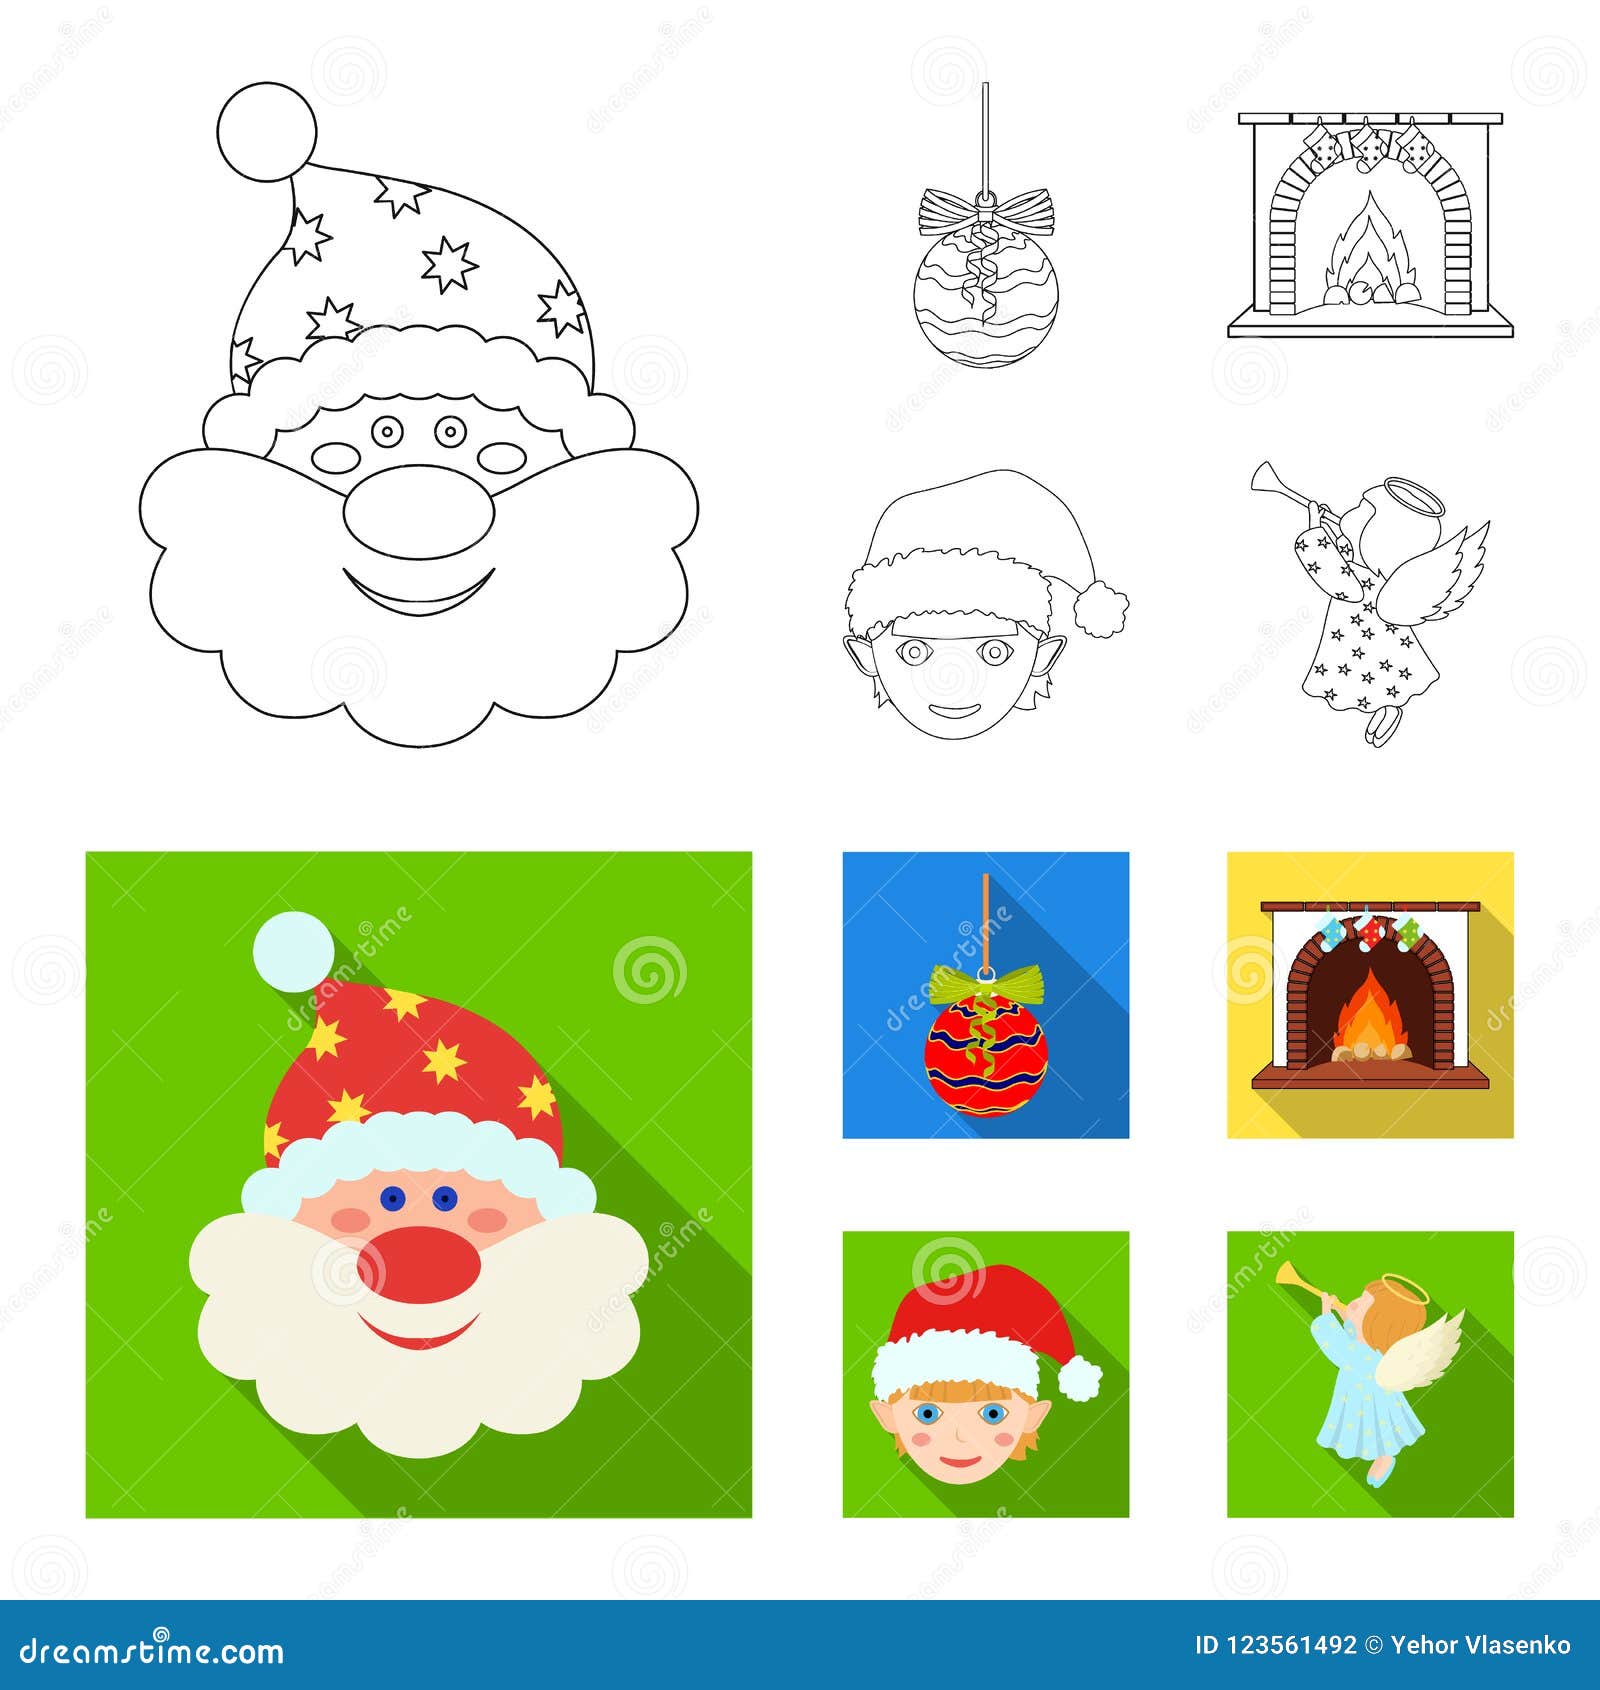 Santa Claus dwarf fireplace and decoration outline flat icons in set collection for design Christmas vector symbol stock illustration